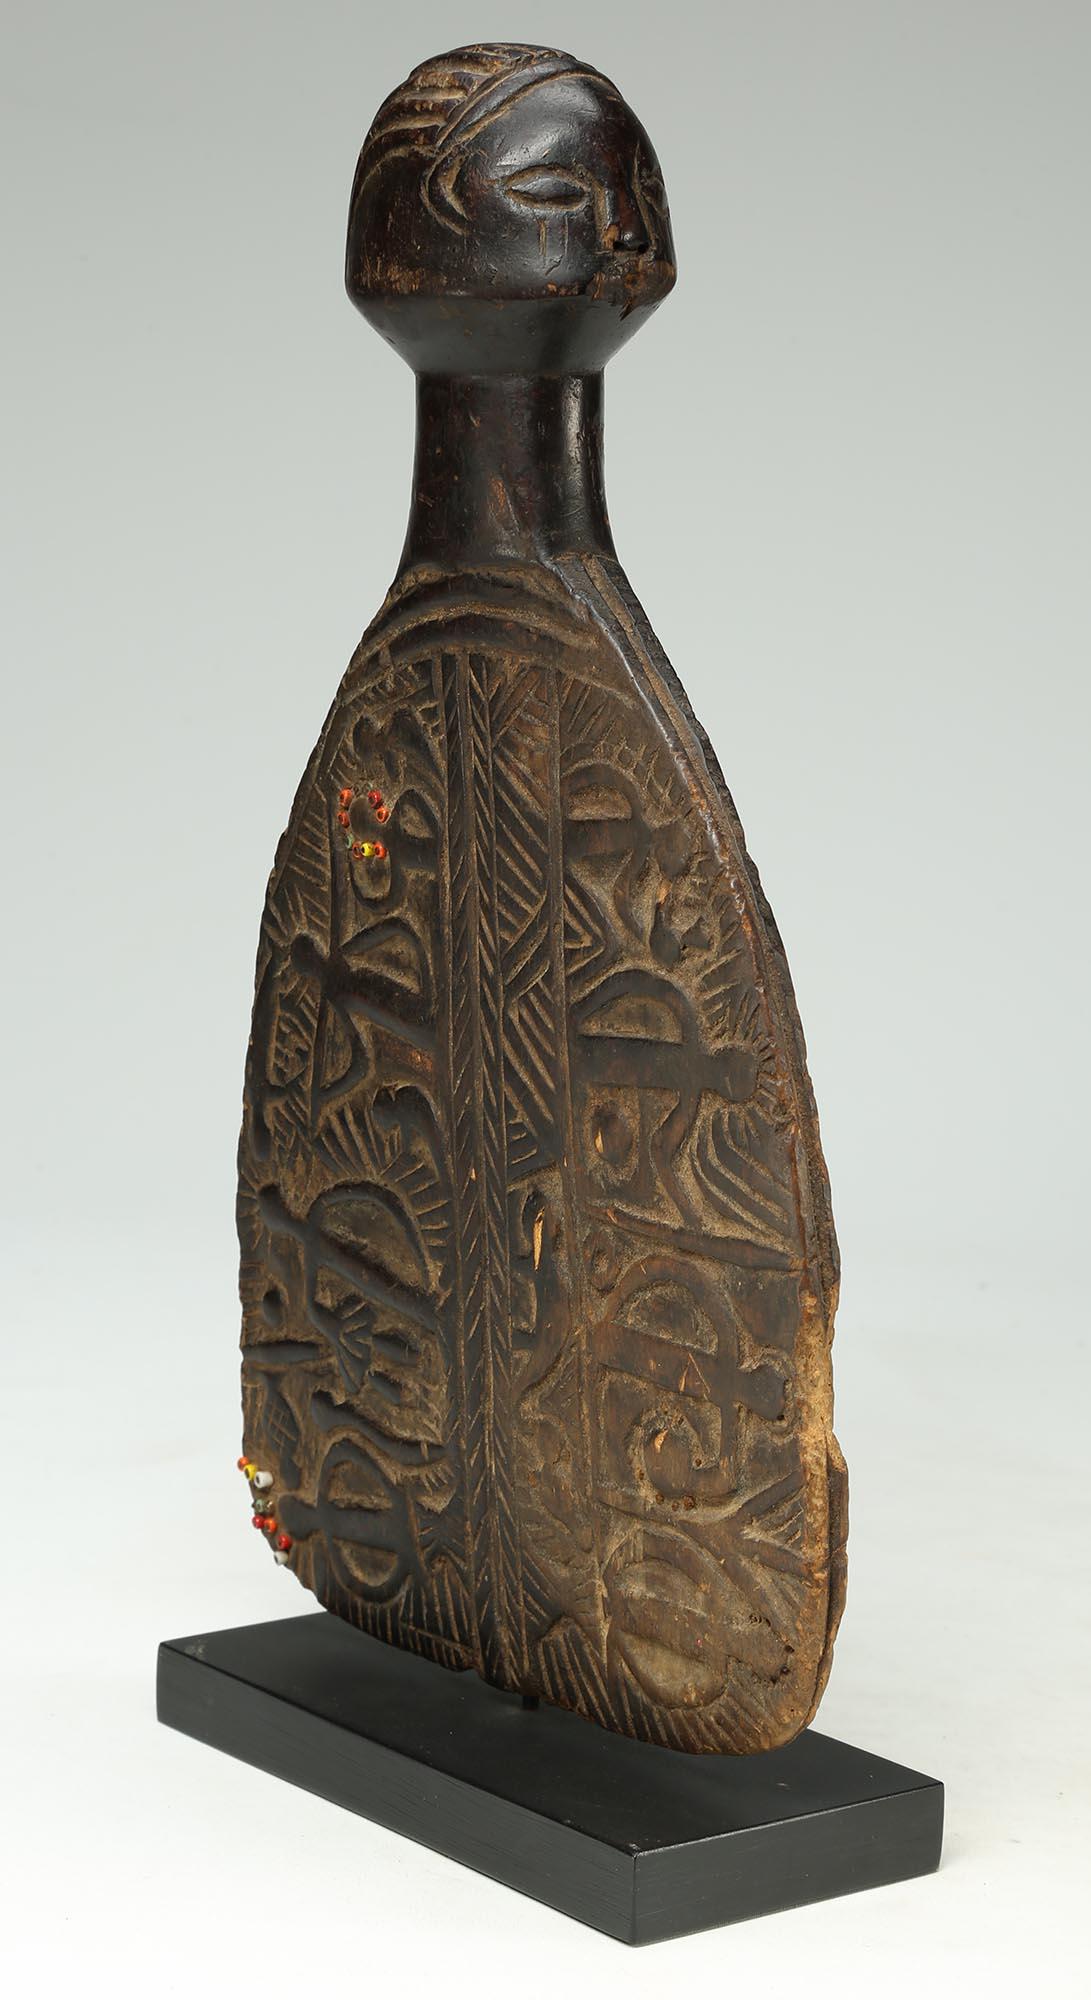 Hand-Carved Luba Memory or Story Board with Head Congo Early 20th Century African Tribal Art For Sale